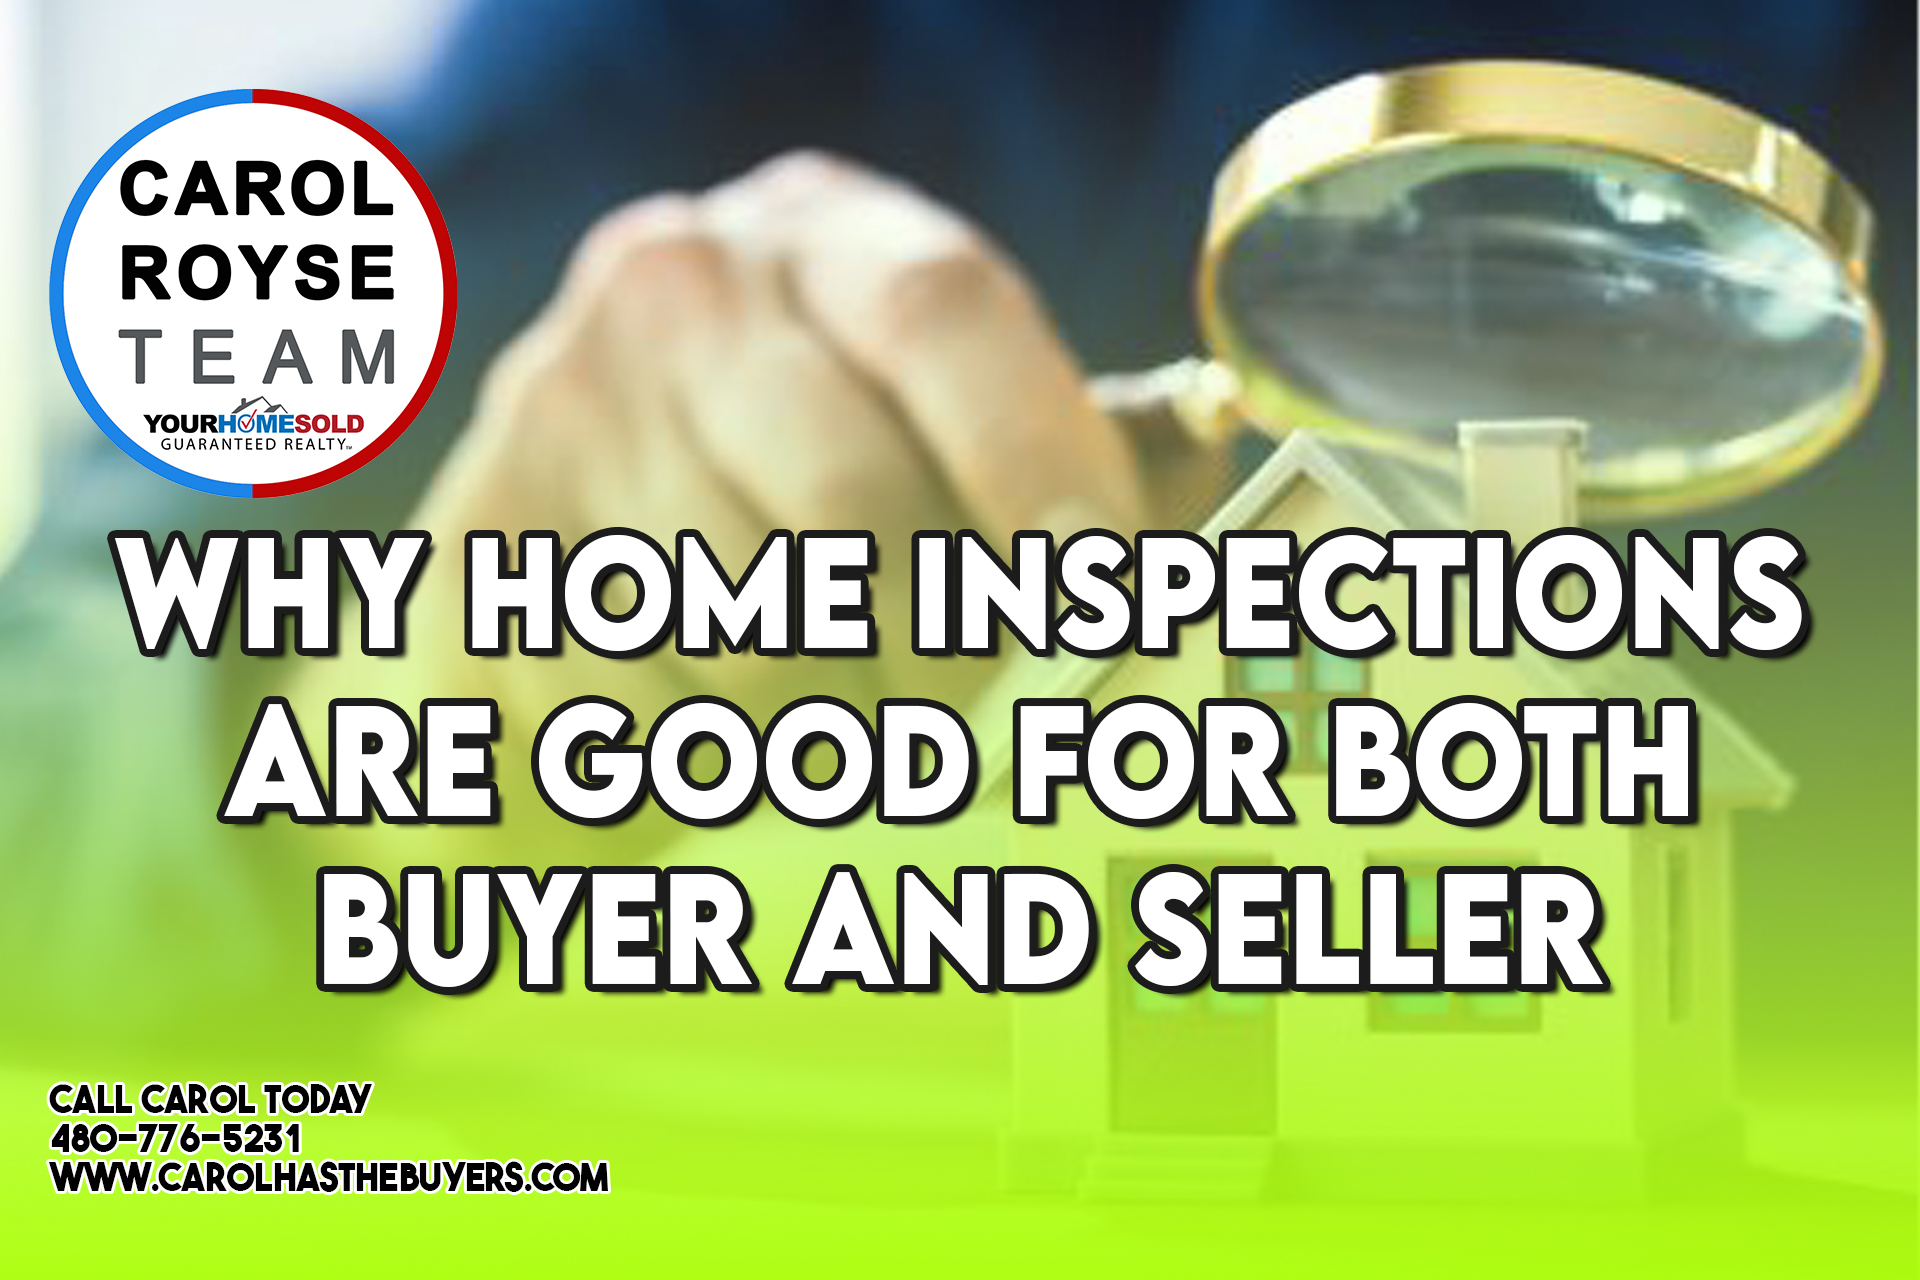 Why Home Inspections are Good for both Buyer and Seller